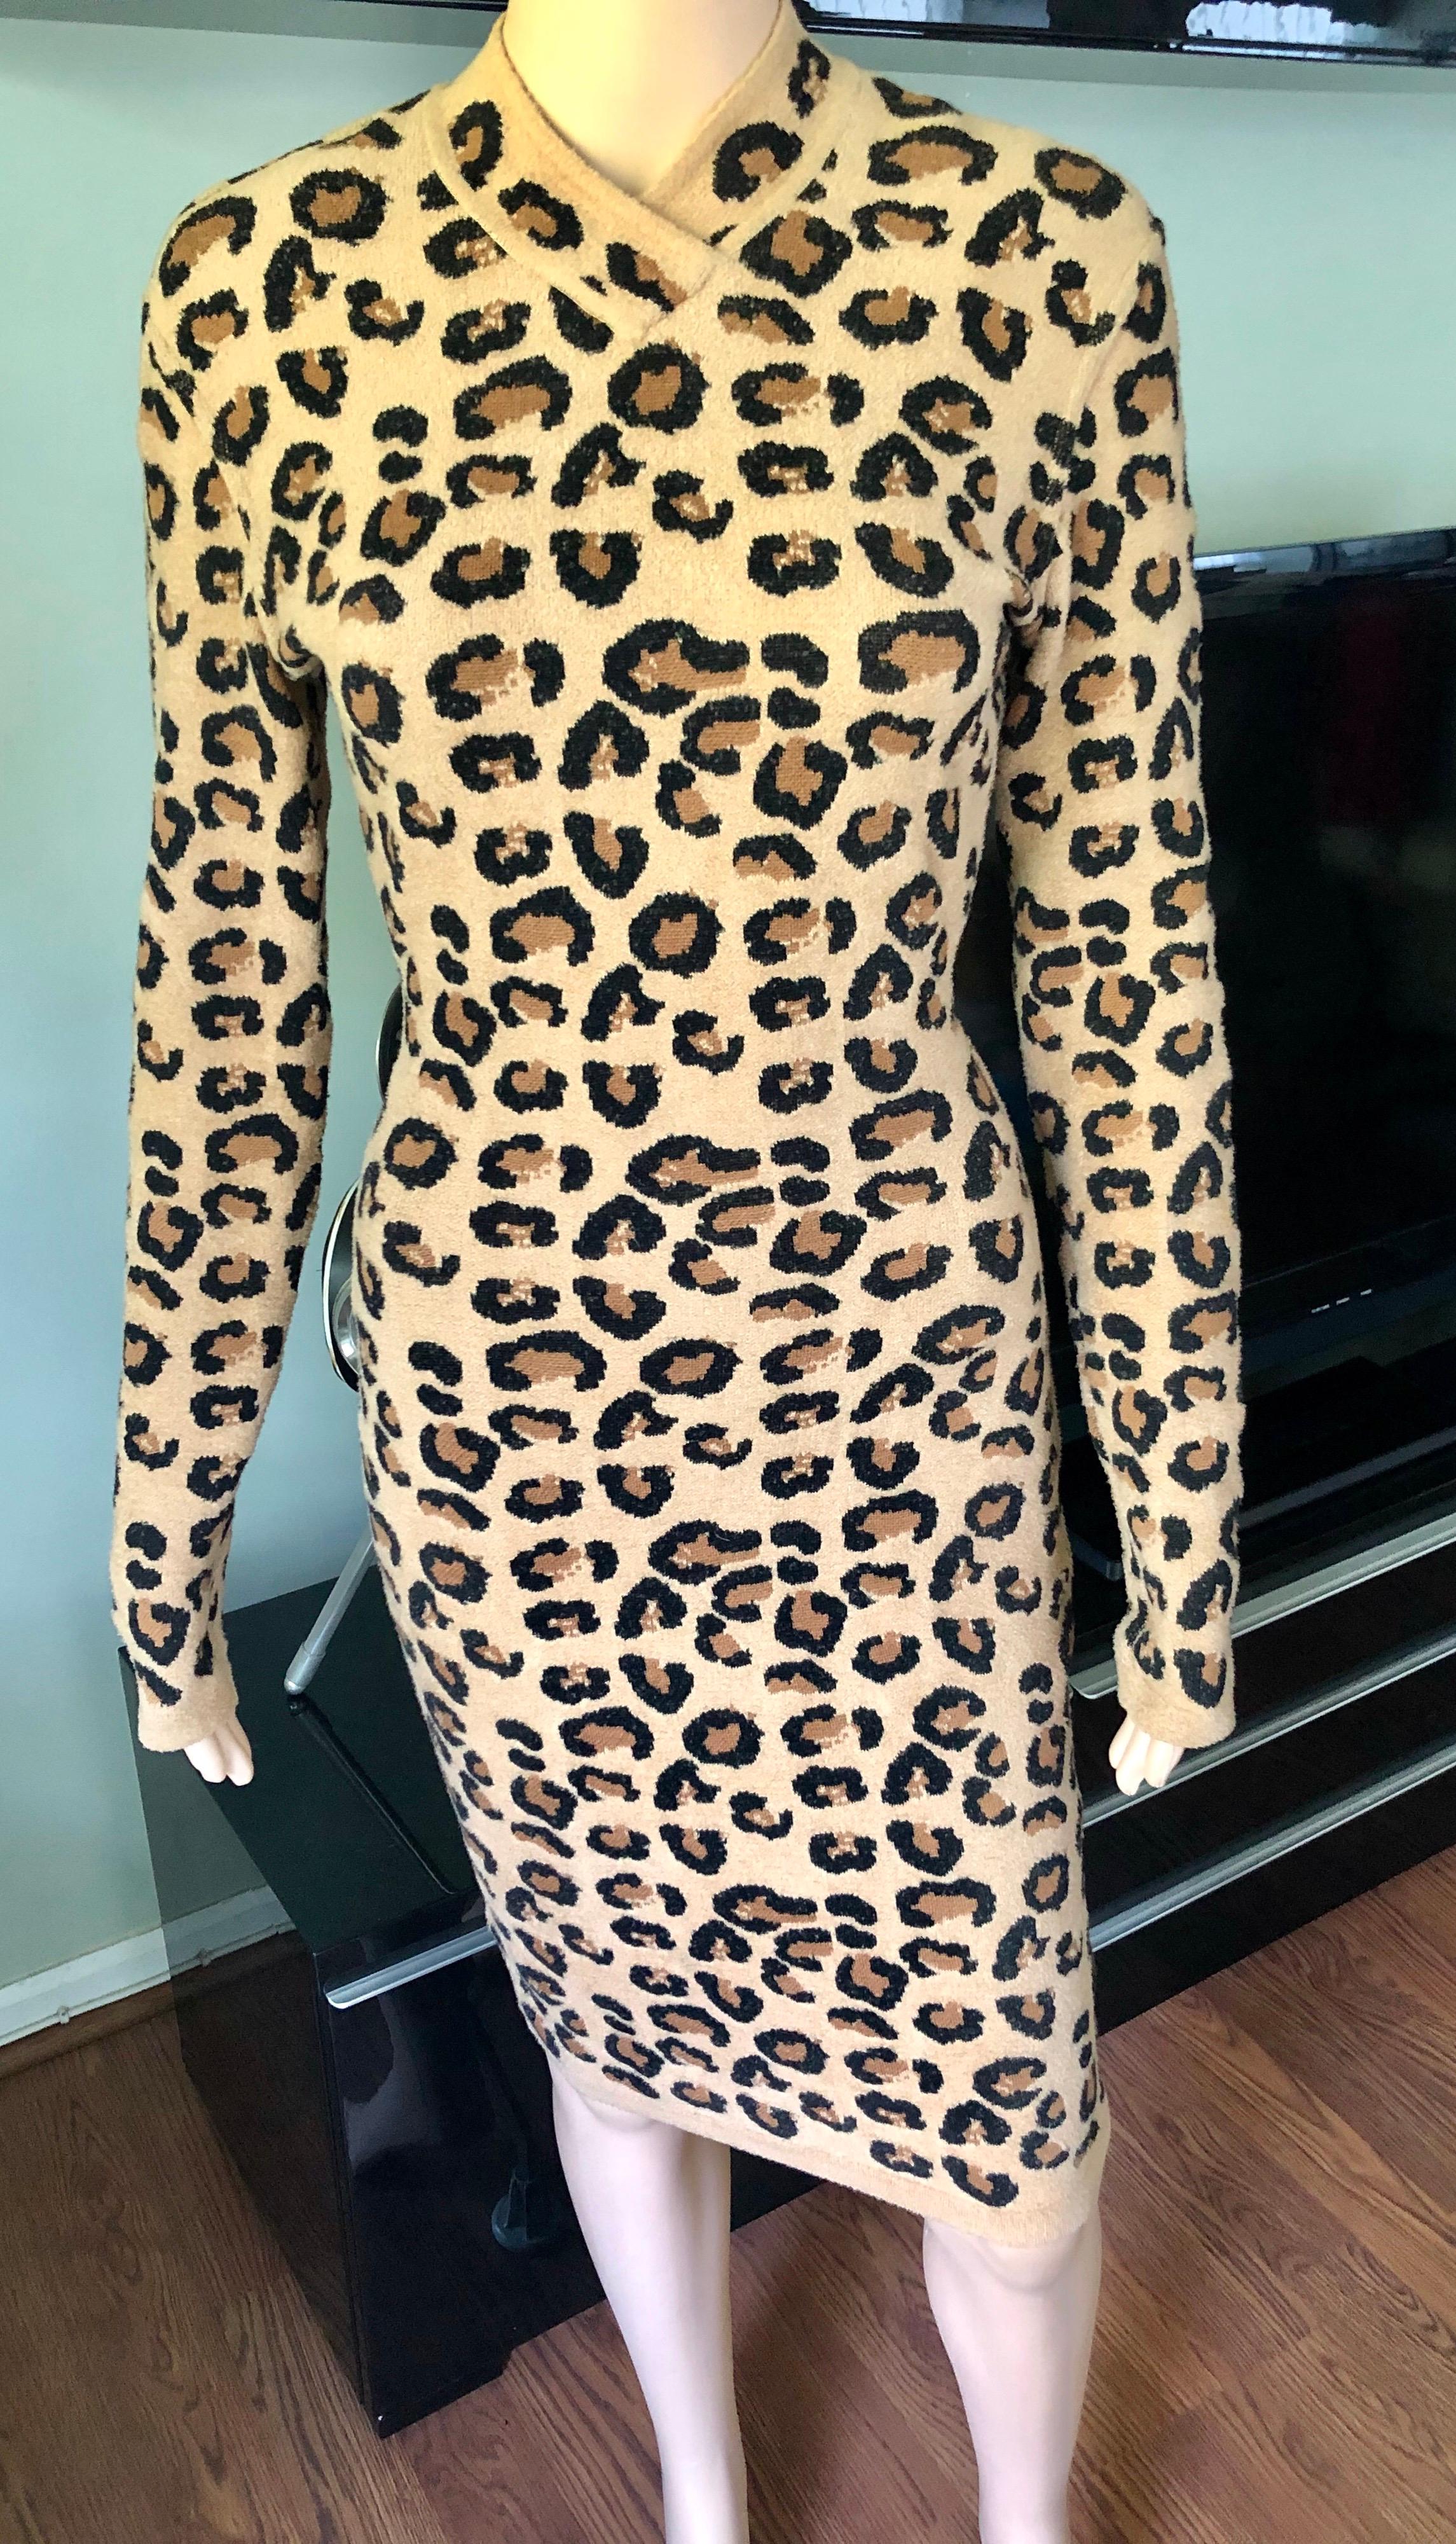 Azzedine Alaia F/W 1991 Runway Vintage Iconic Leopard Print Bodycon Dress Size L

 Iconic Azzedine Alaïa leopard print stretch bodycon dress featuring high v neckline and back zip closing. Collectors Piece from one of the Alaia's most famous